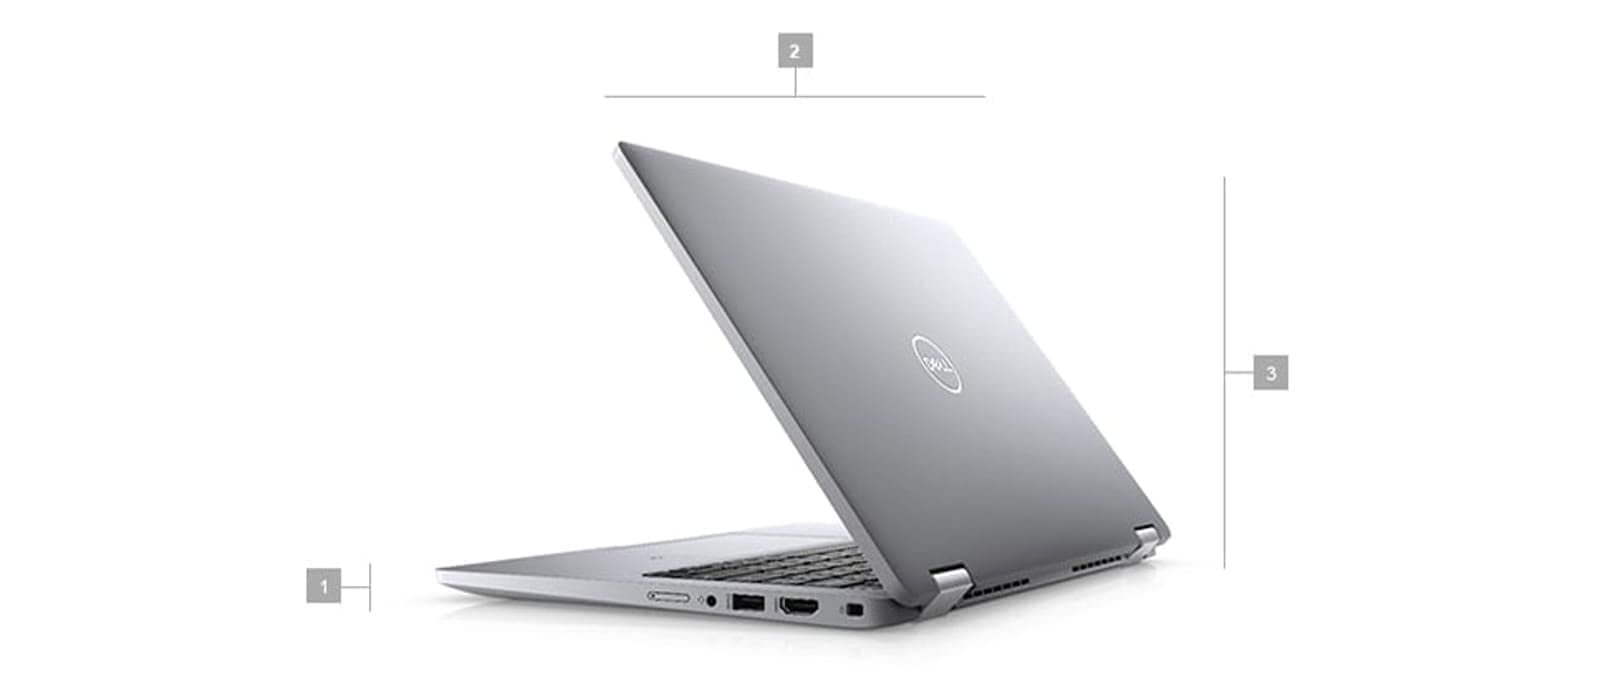 Dell Latitude 5000 5320 2-in-1 (2021) | 13.3" FHD Touch | Core i5 - 256GB SSD - 16GB RAM | 4 Cores @ 4.2 GHz - 11th Gen CPU (Renewed)